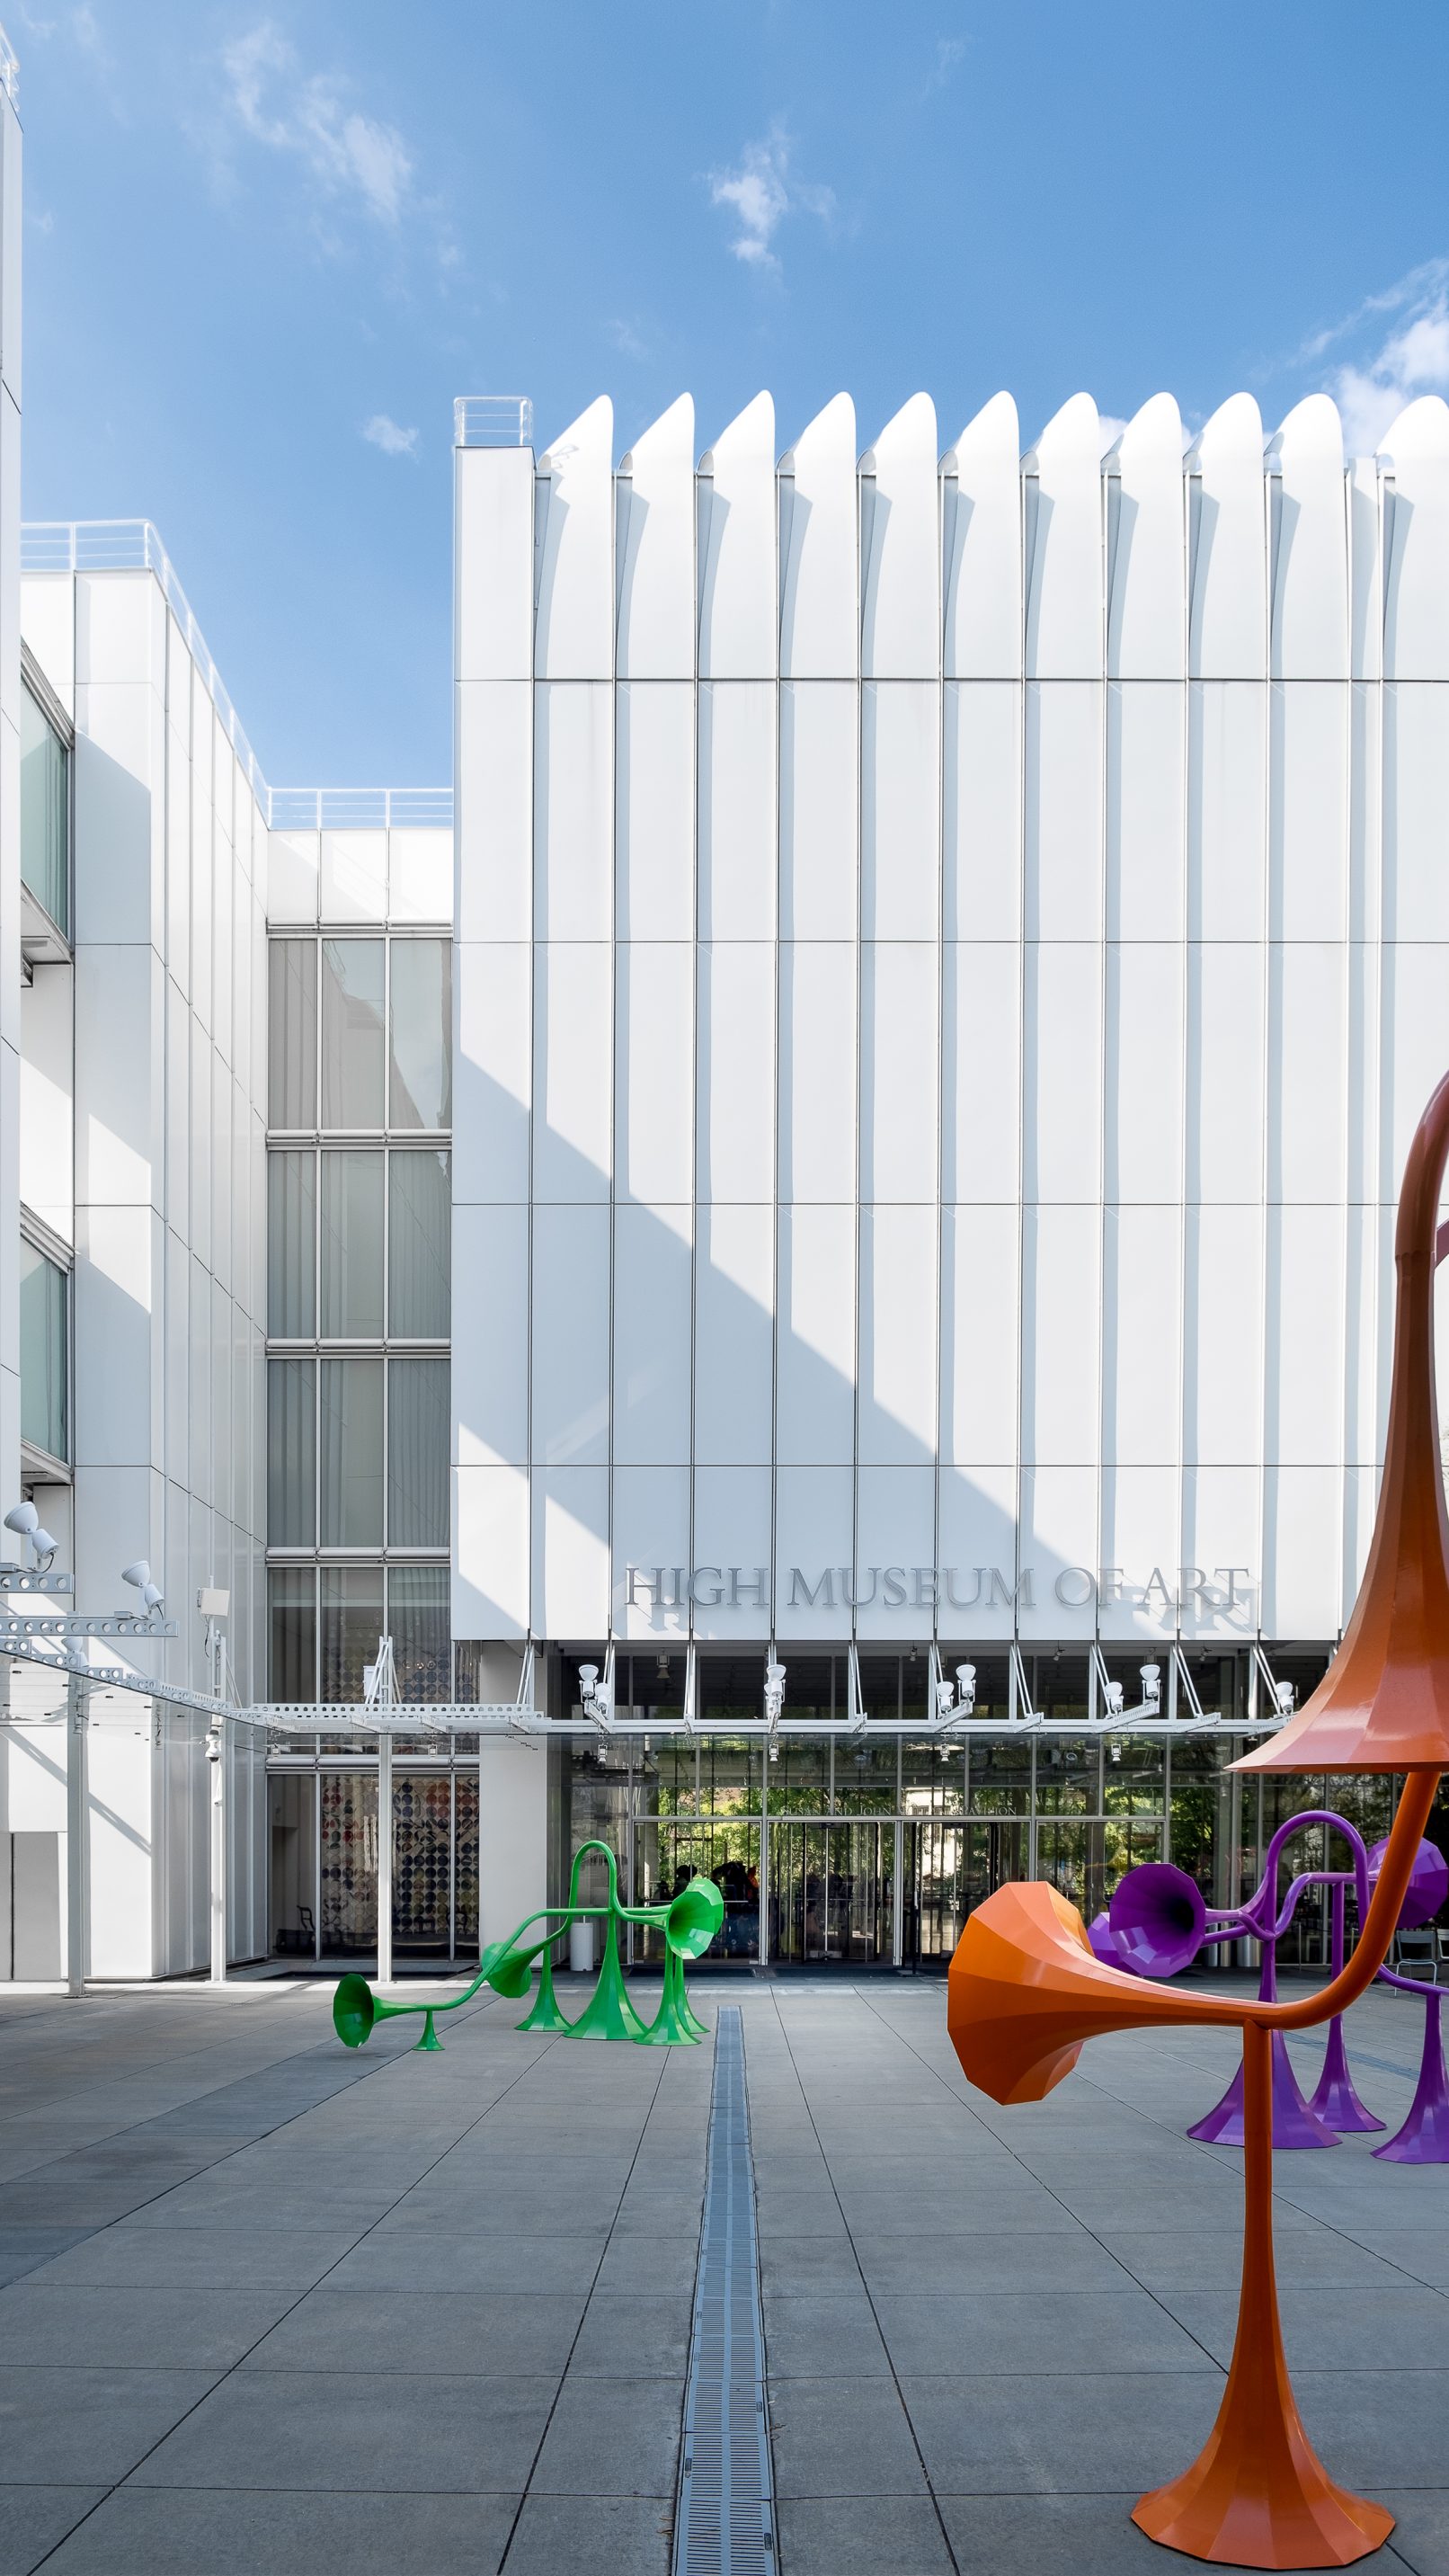 Architectural Photography of the High Museum of Art in Atlanta Georgia in a one point perspective from the main quad of the museum center with some horn-like sculptures placed throughout